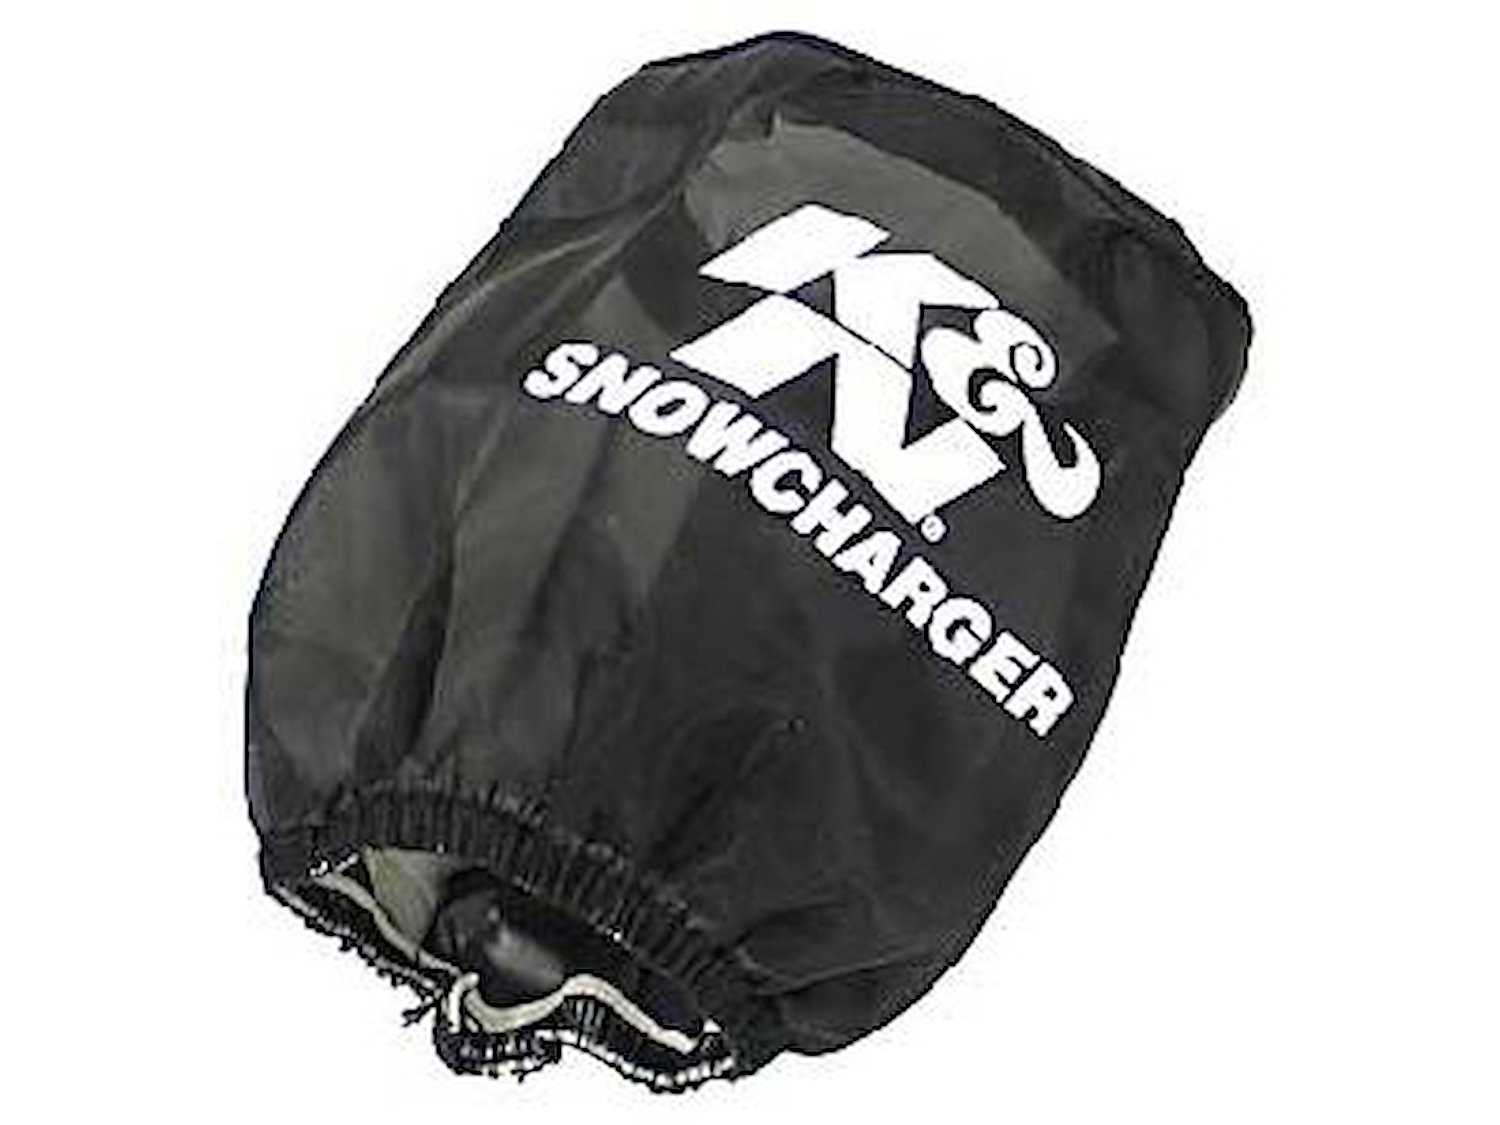 Round Tapered Air Filter Wrap Wrap Type: Snowcharger